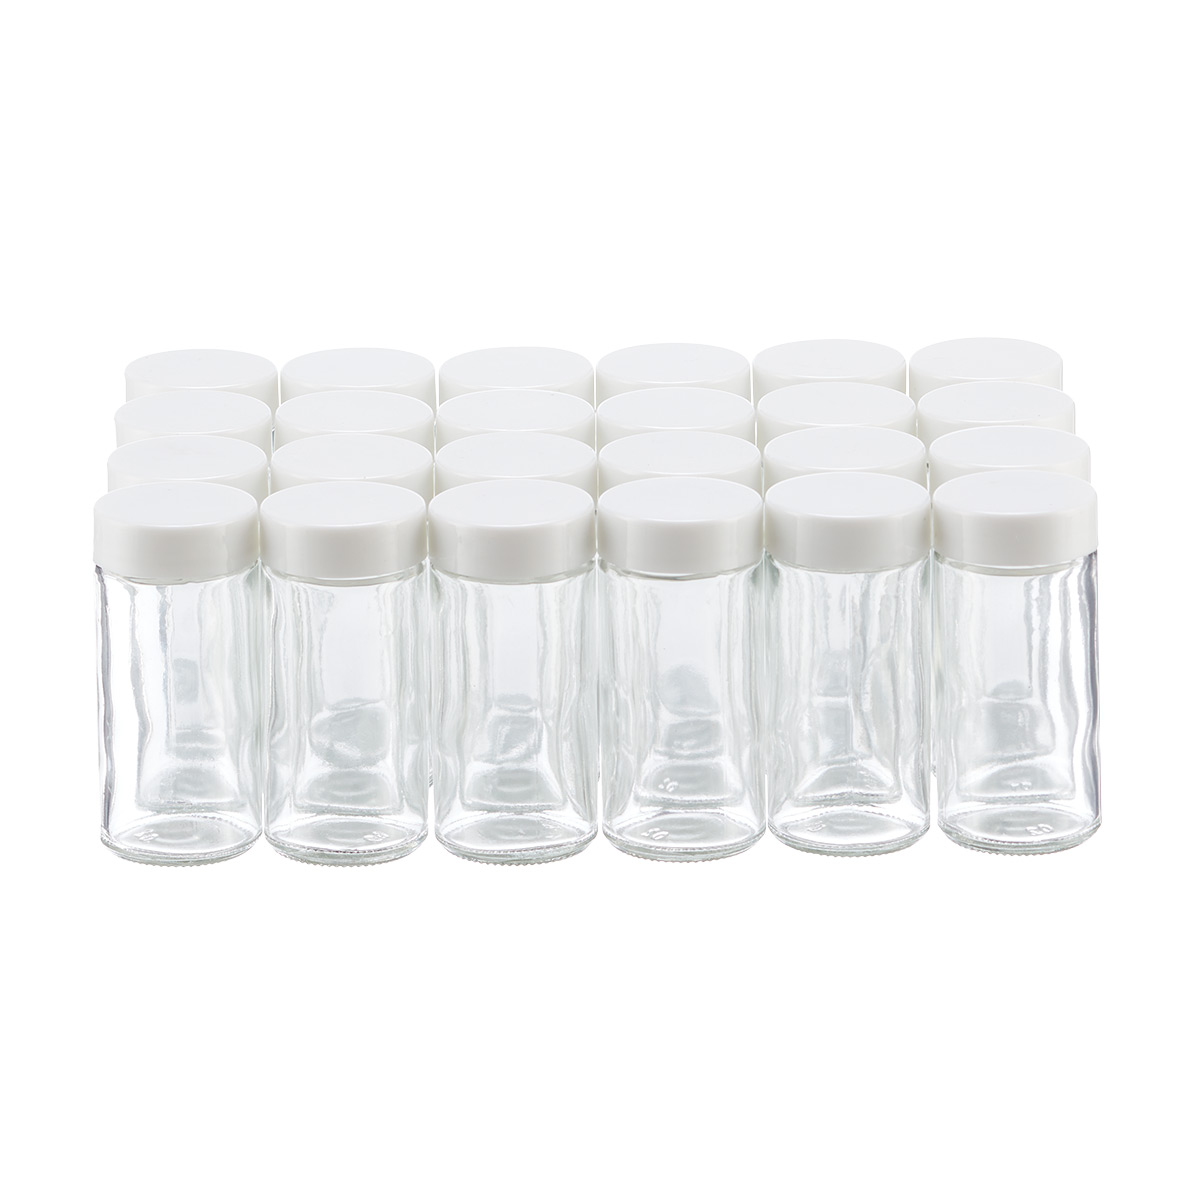 https://www.containerstore.com/catalogimages/490038/10090441-3oz-spice-bottle-white-lid-.jpg